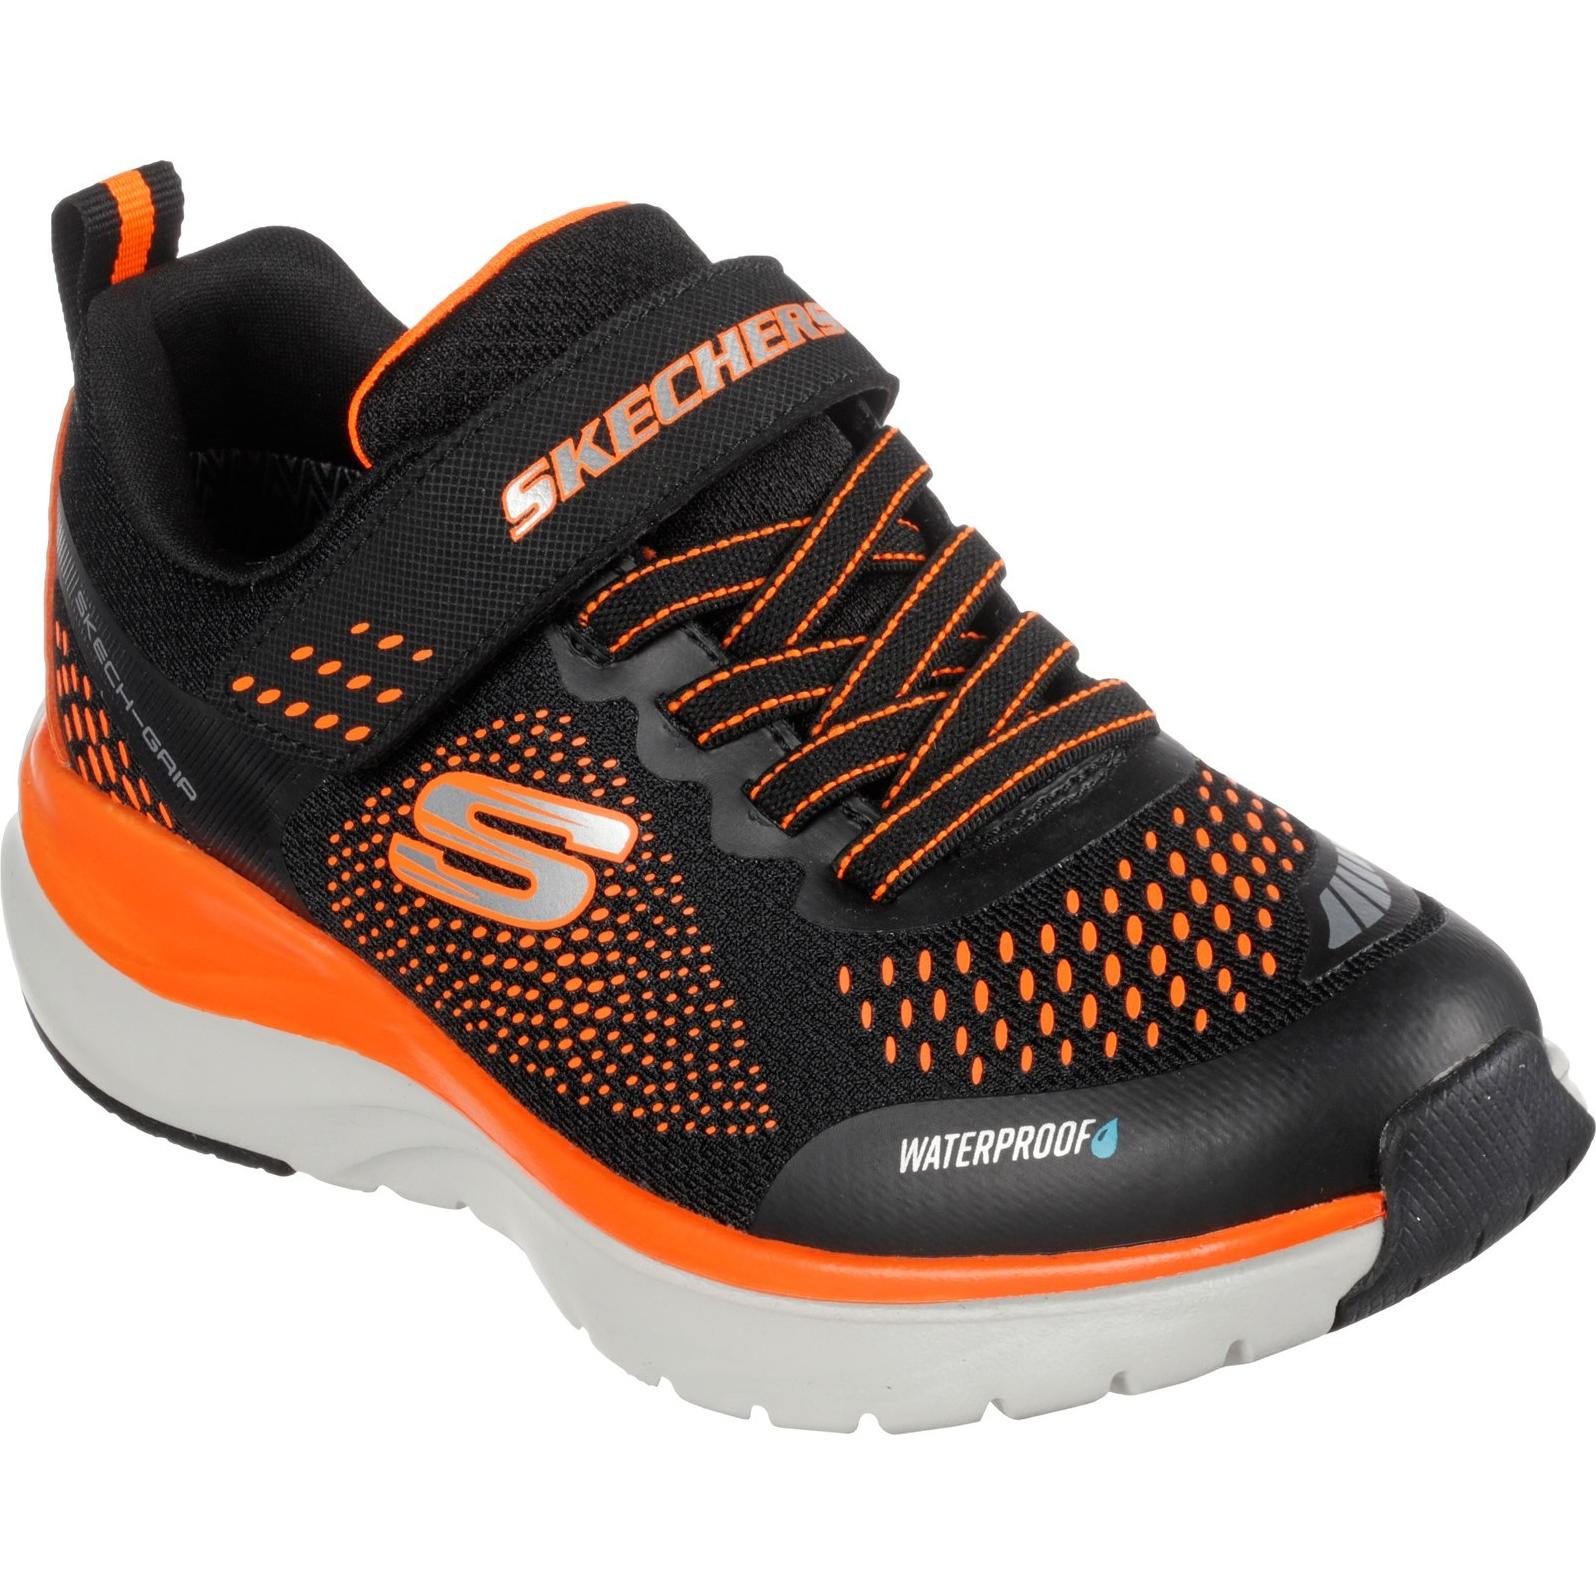 Skechers Ultra Groove Trainers